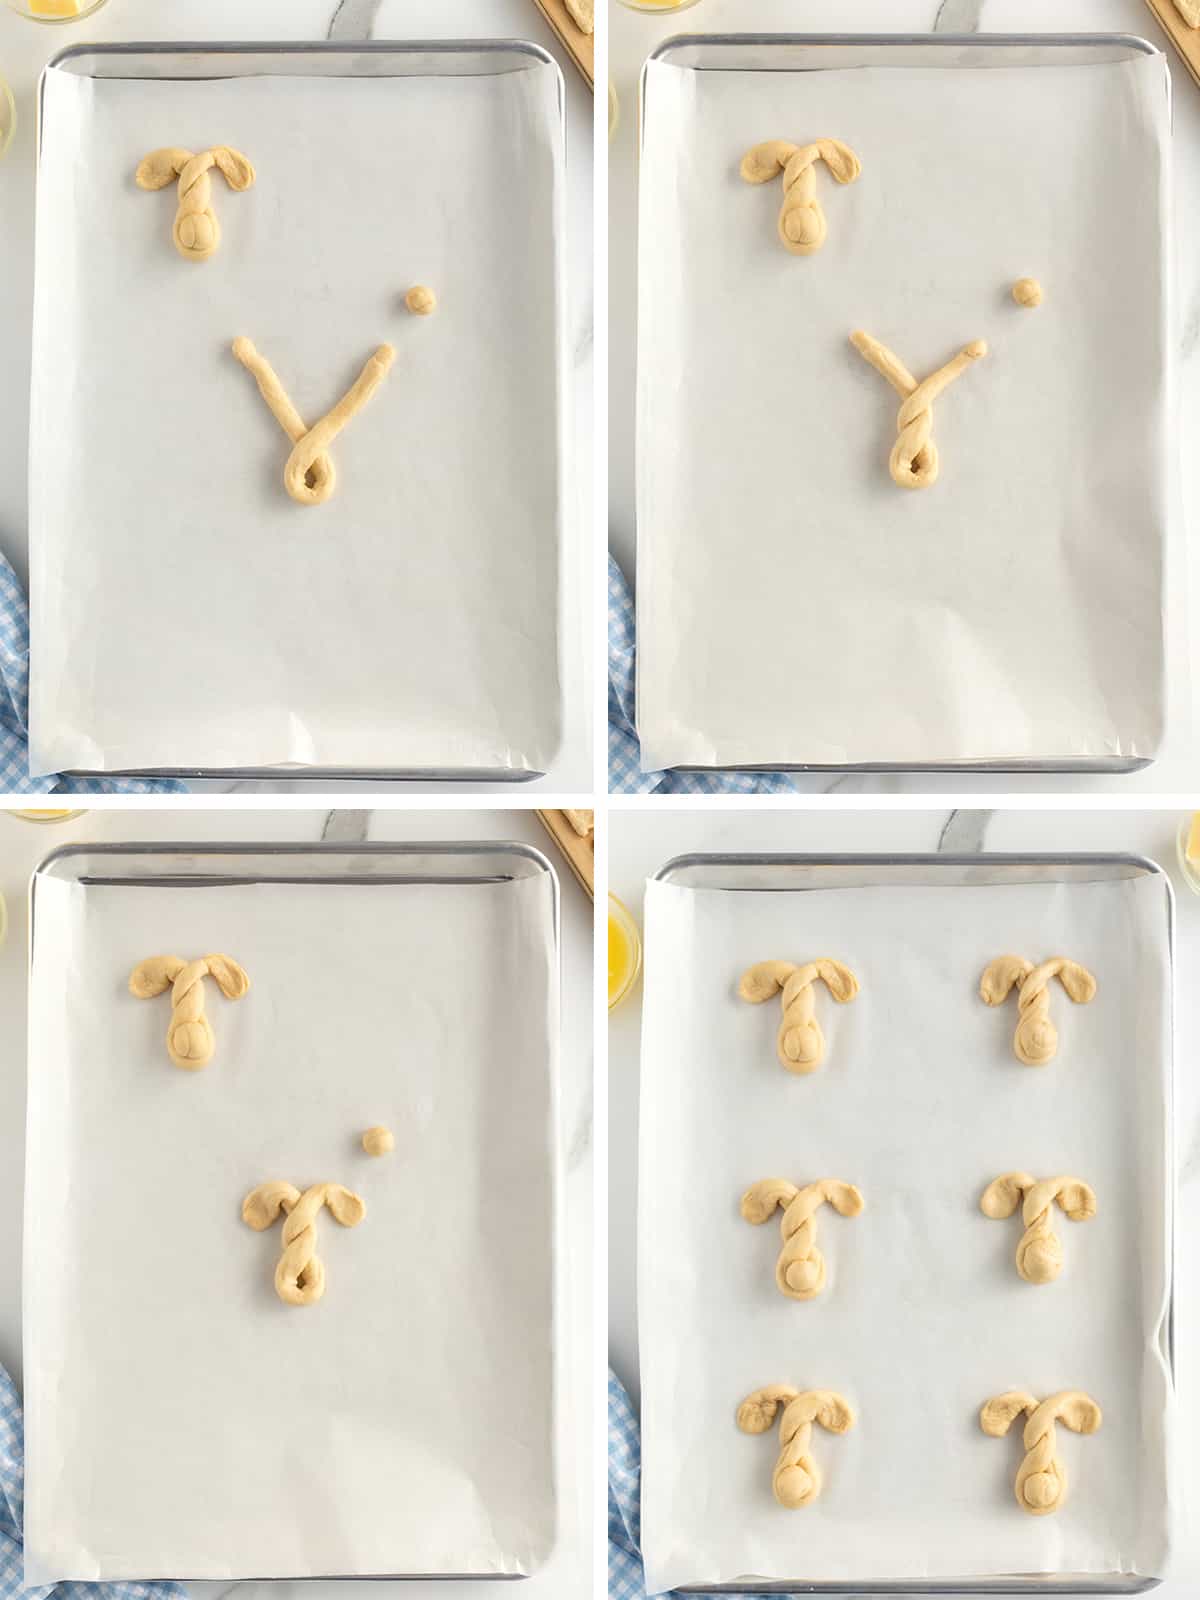 Bunny Shaped Crescent Dinner Rolls by The BakerMama